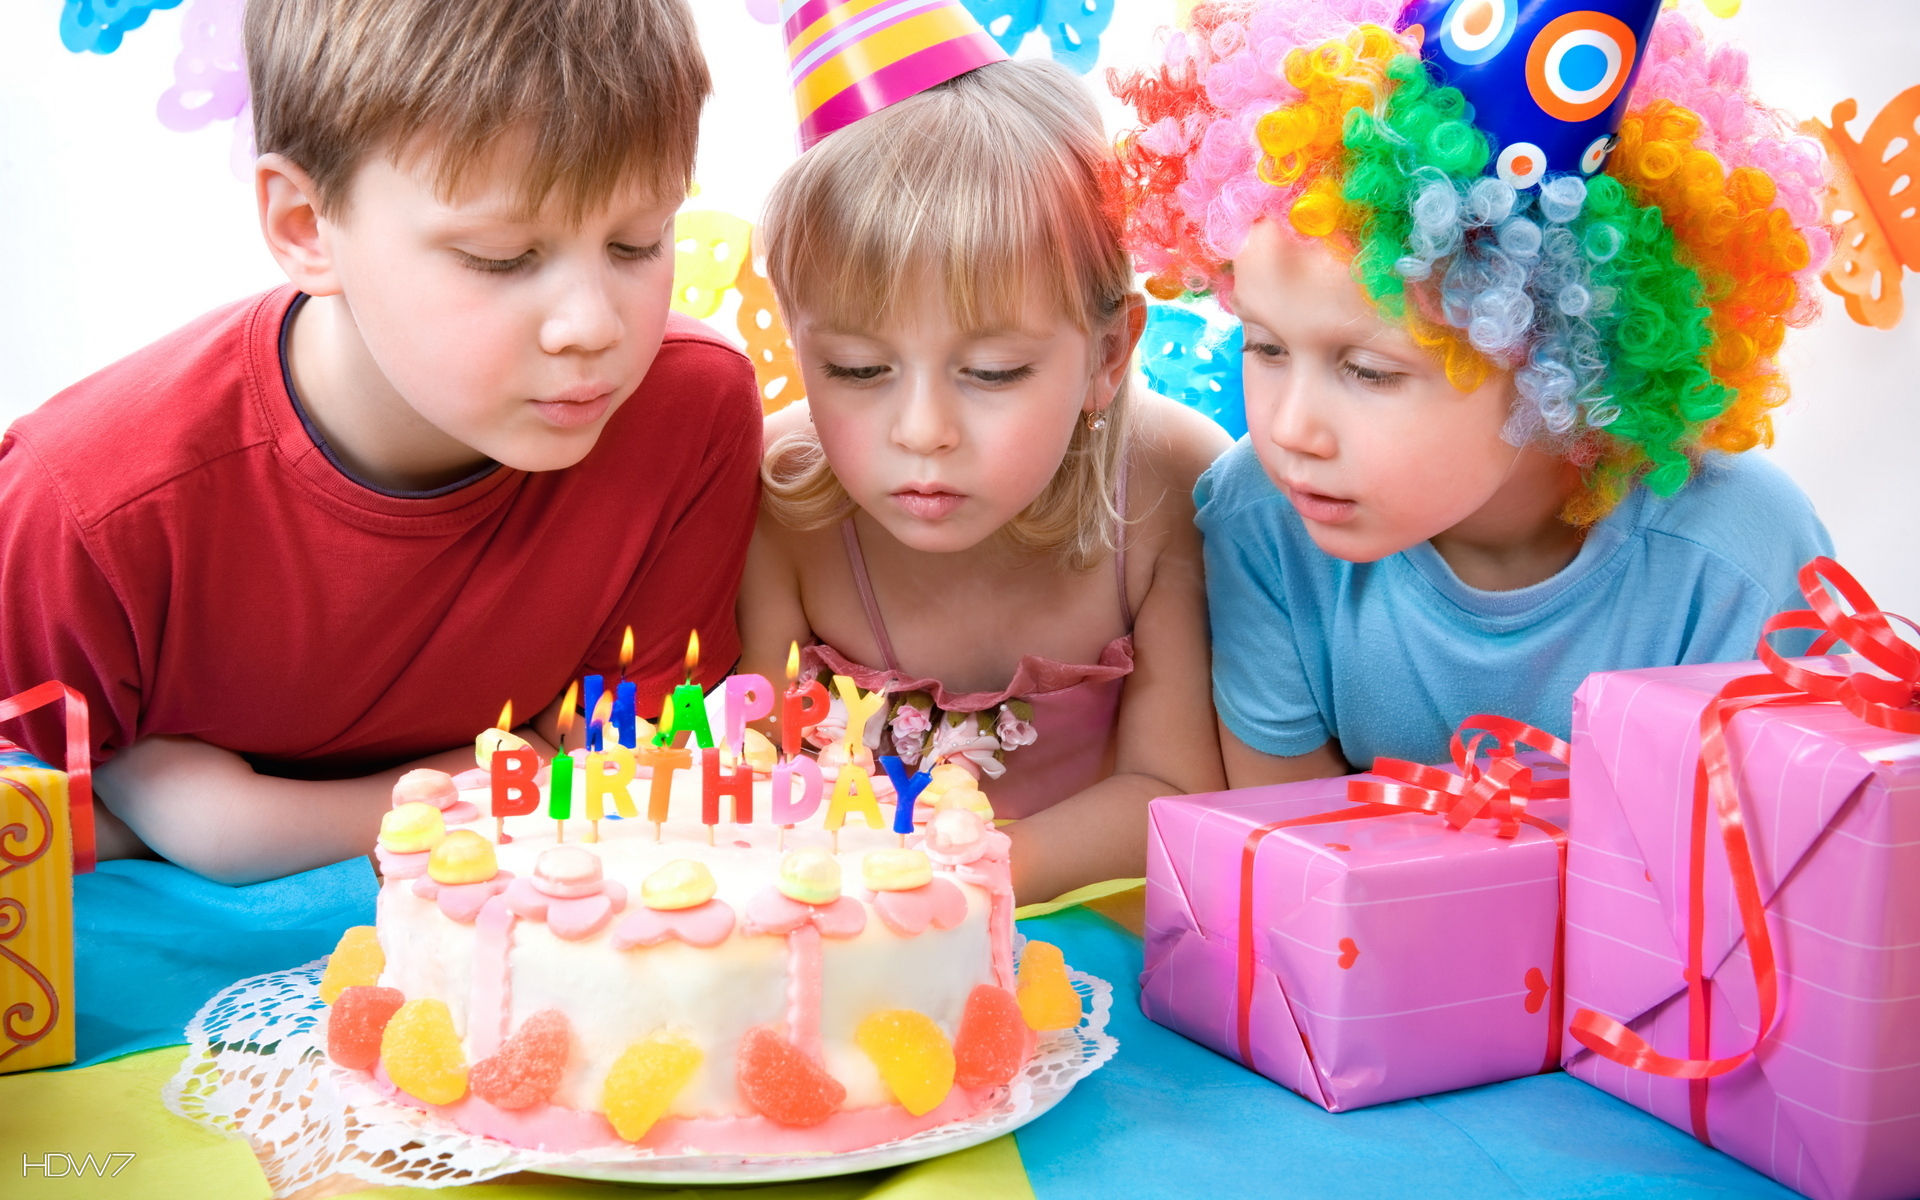 Happy Birthday Kids Party Fruit Cake Candles Presents - Birthday Party Pics Hd - HD Wallpaper 